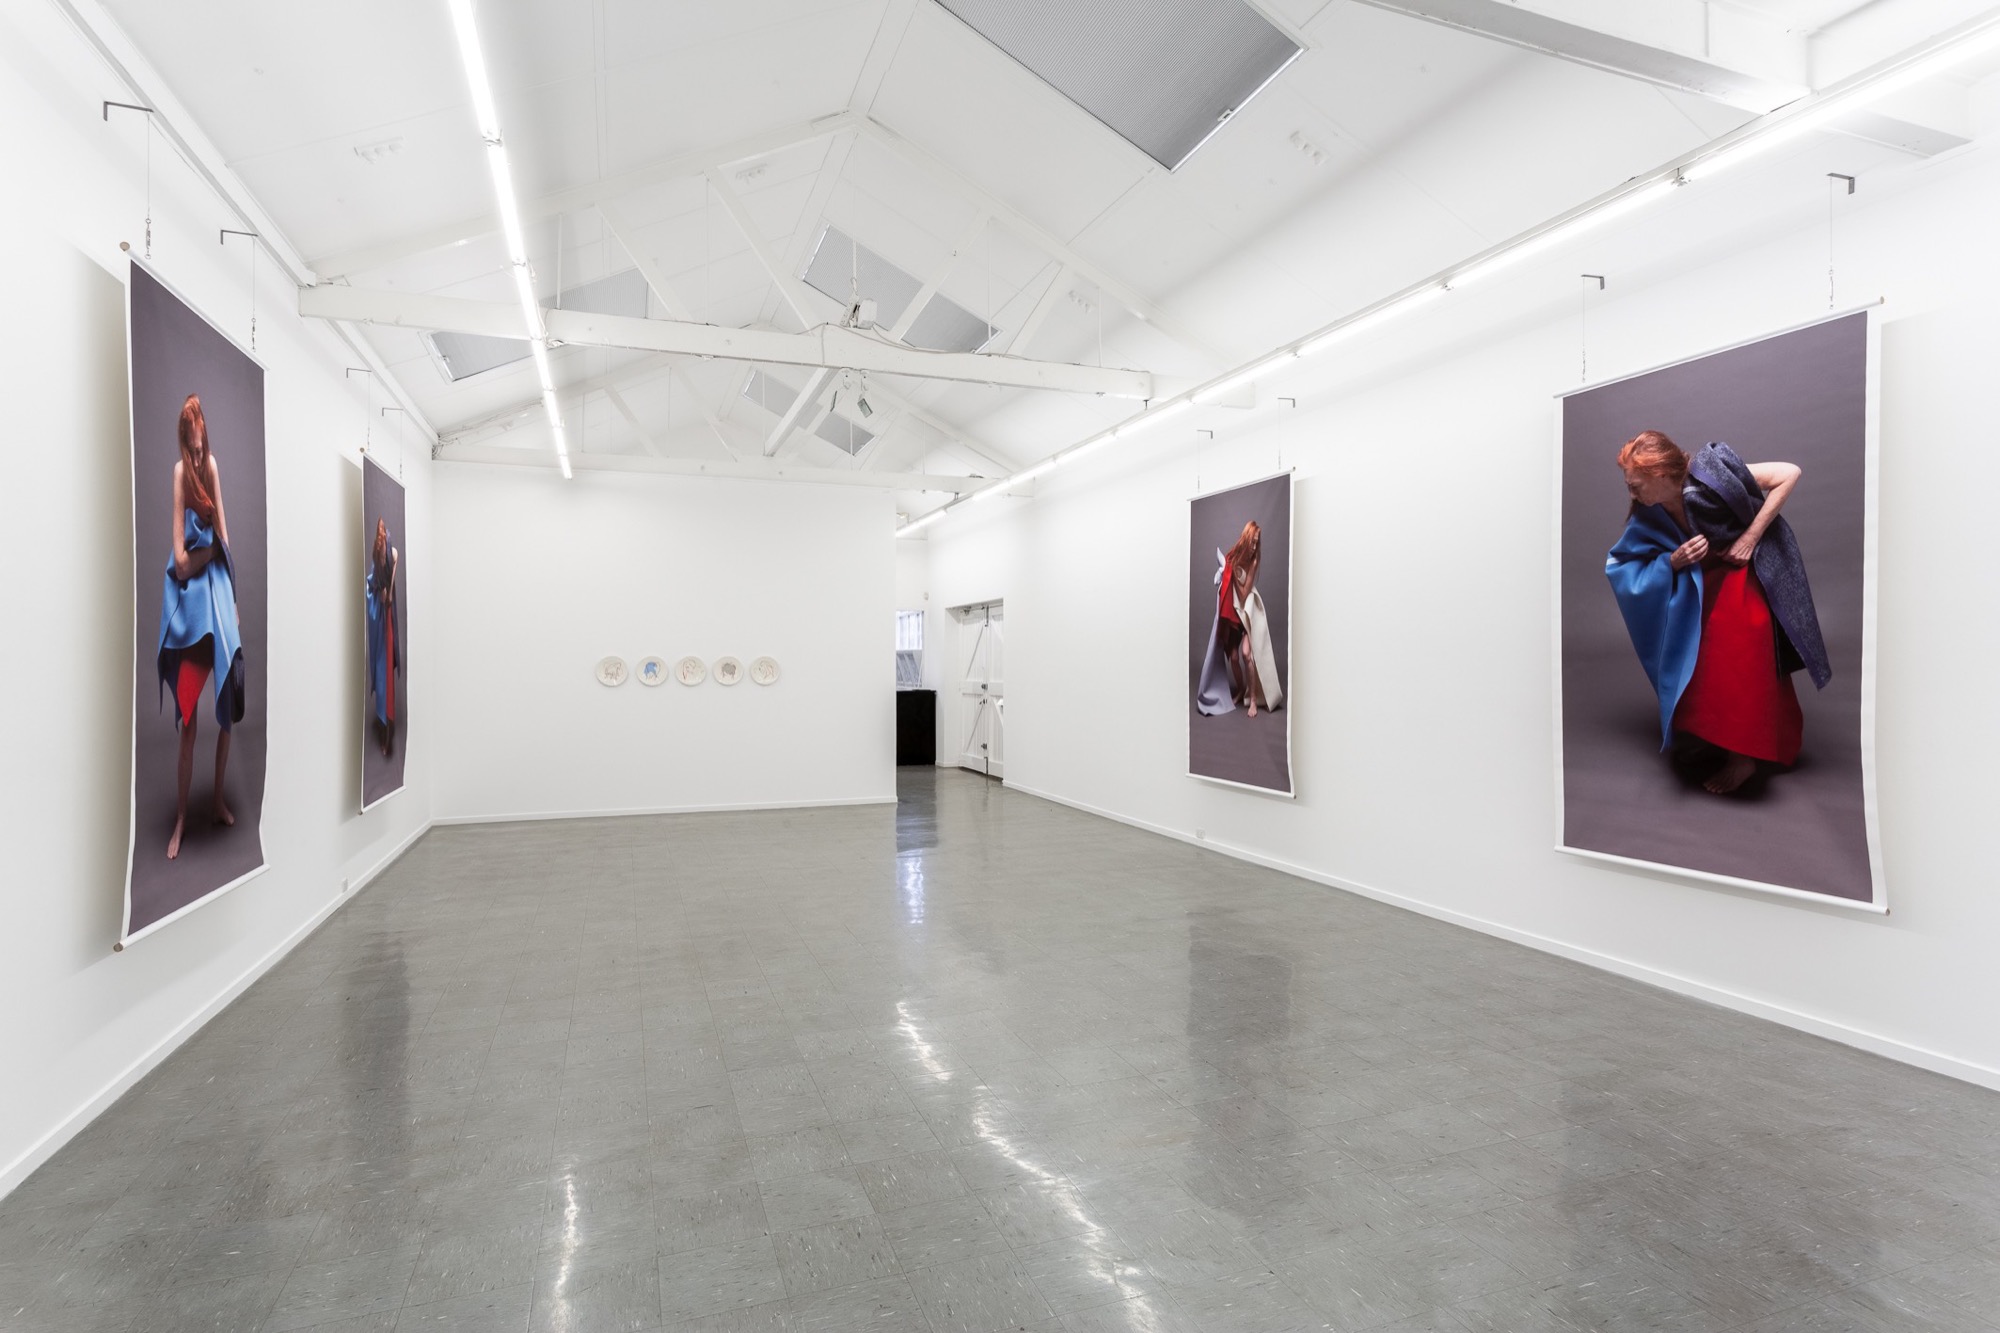 Installation view, White Against Red. Image courtesy the artist and Sutton Gallery, Melbourne. Photography: Christo Crocker.